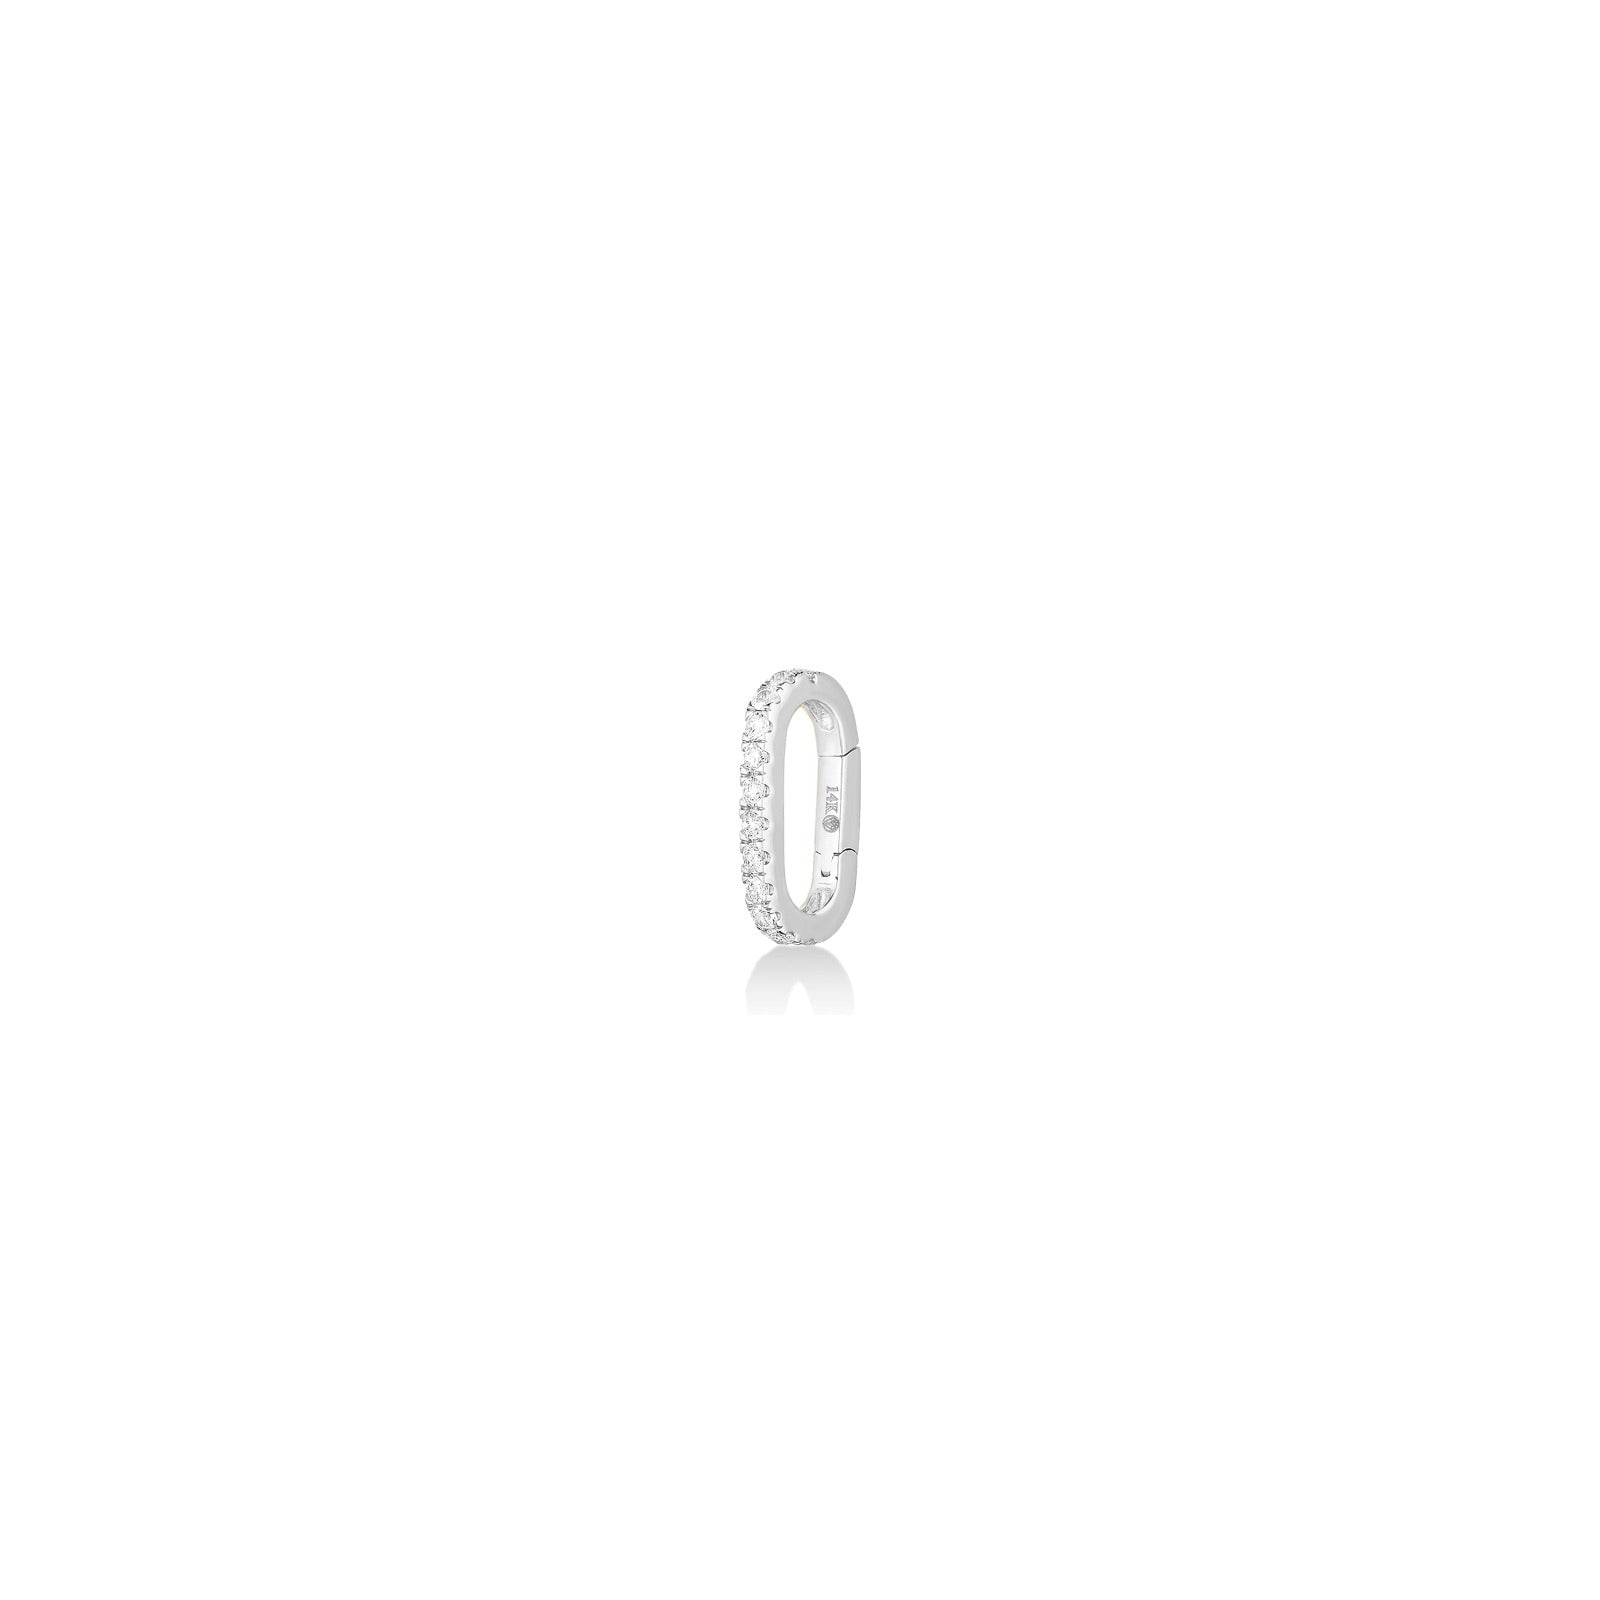 14k white gold small oval locking charm with diamonds.